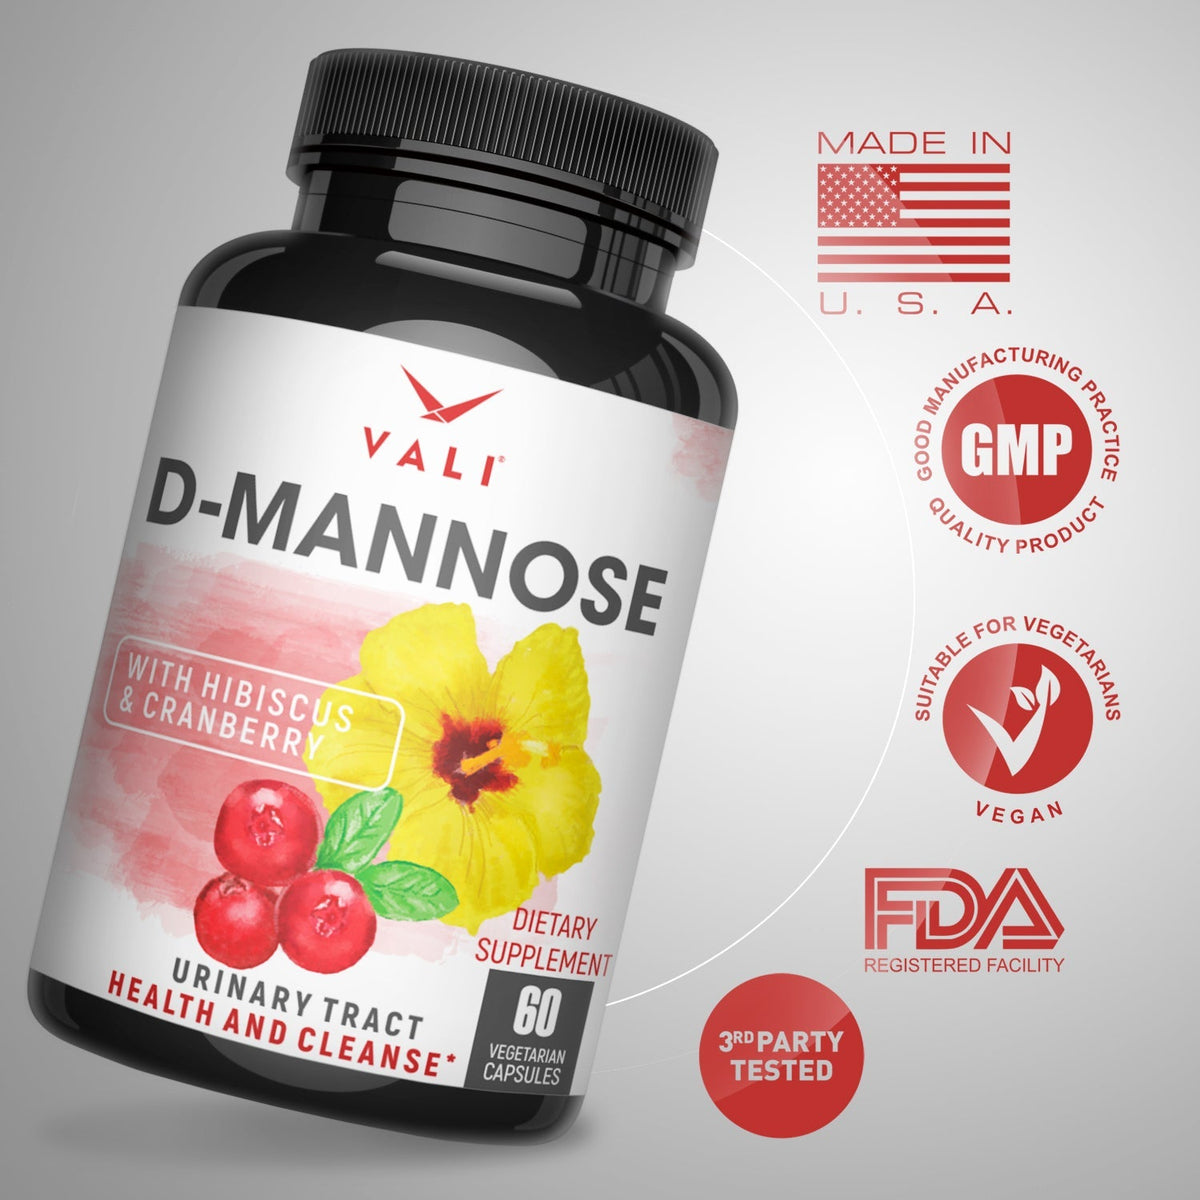 VALI D-Mannose UTI Support - Urinary Tract Health &amp; Cleanse [OFFER]